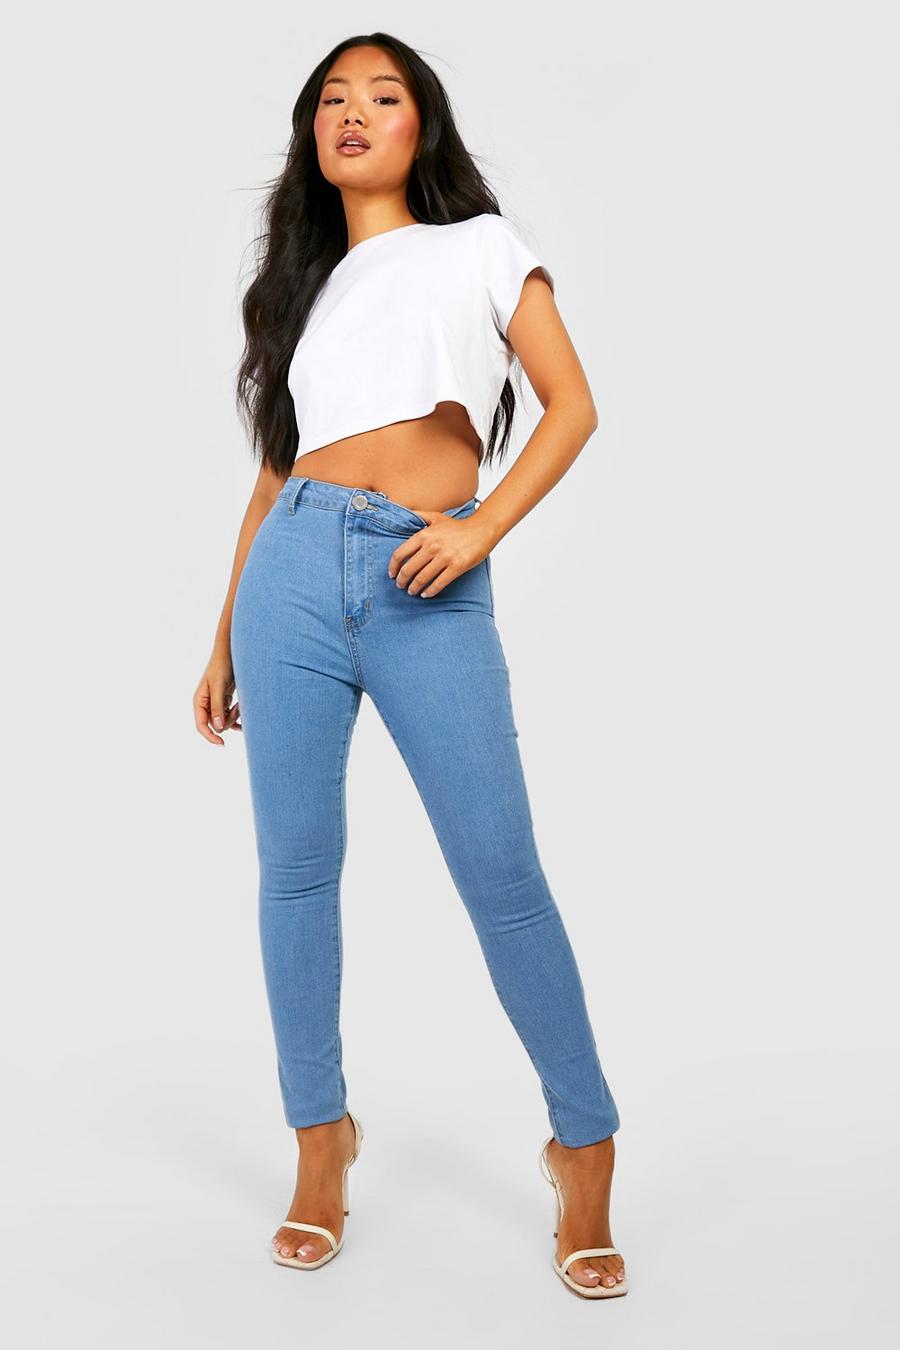 Jeans And A Cute Top, Jeans And A Nice Top